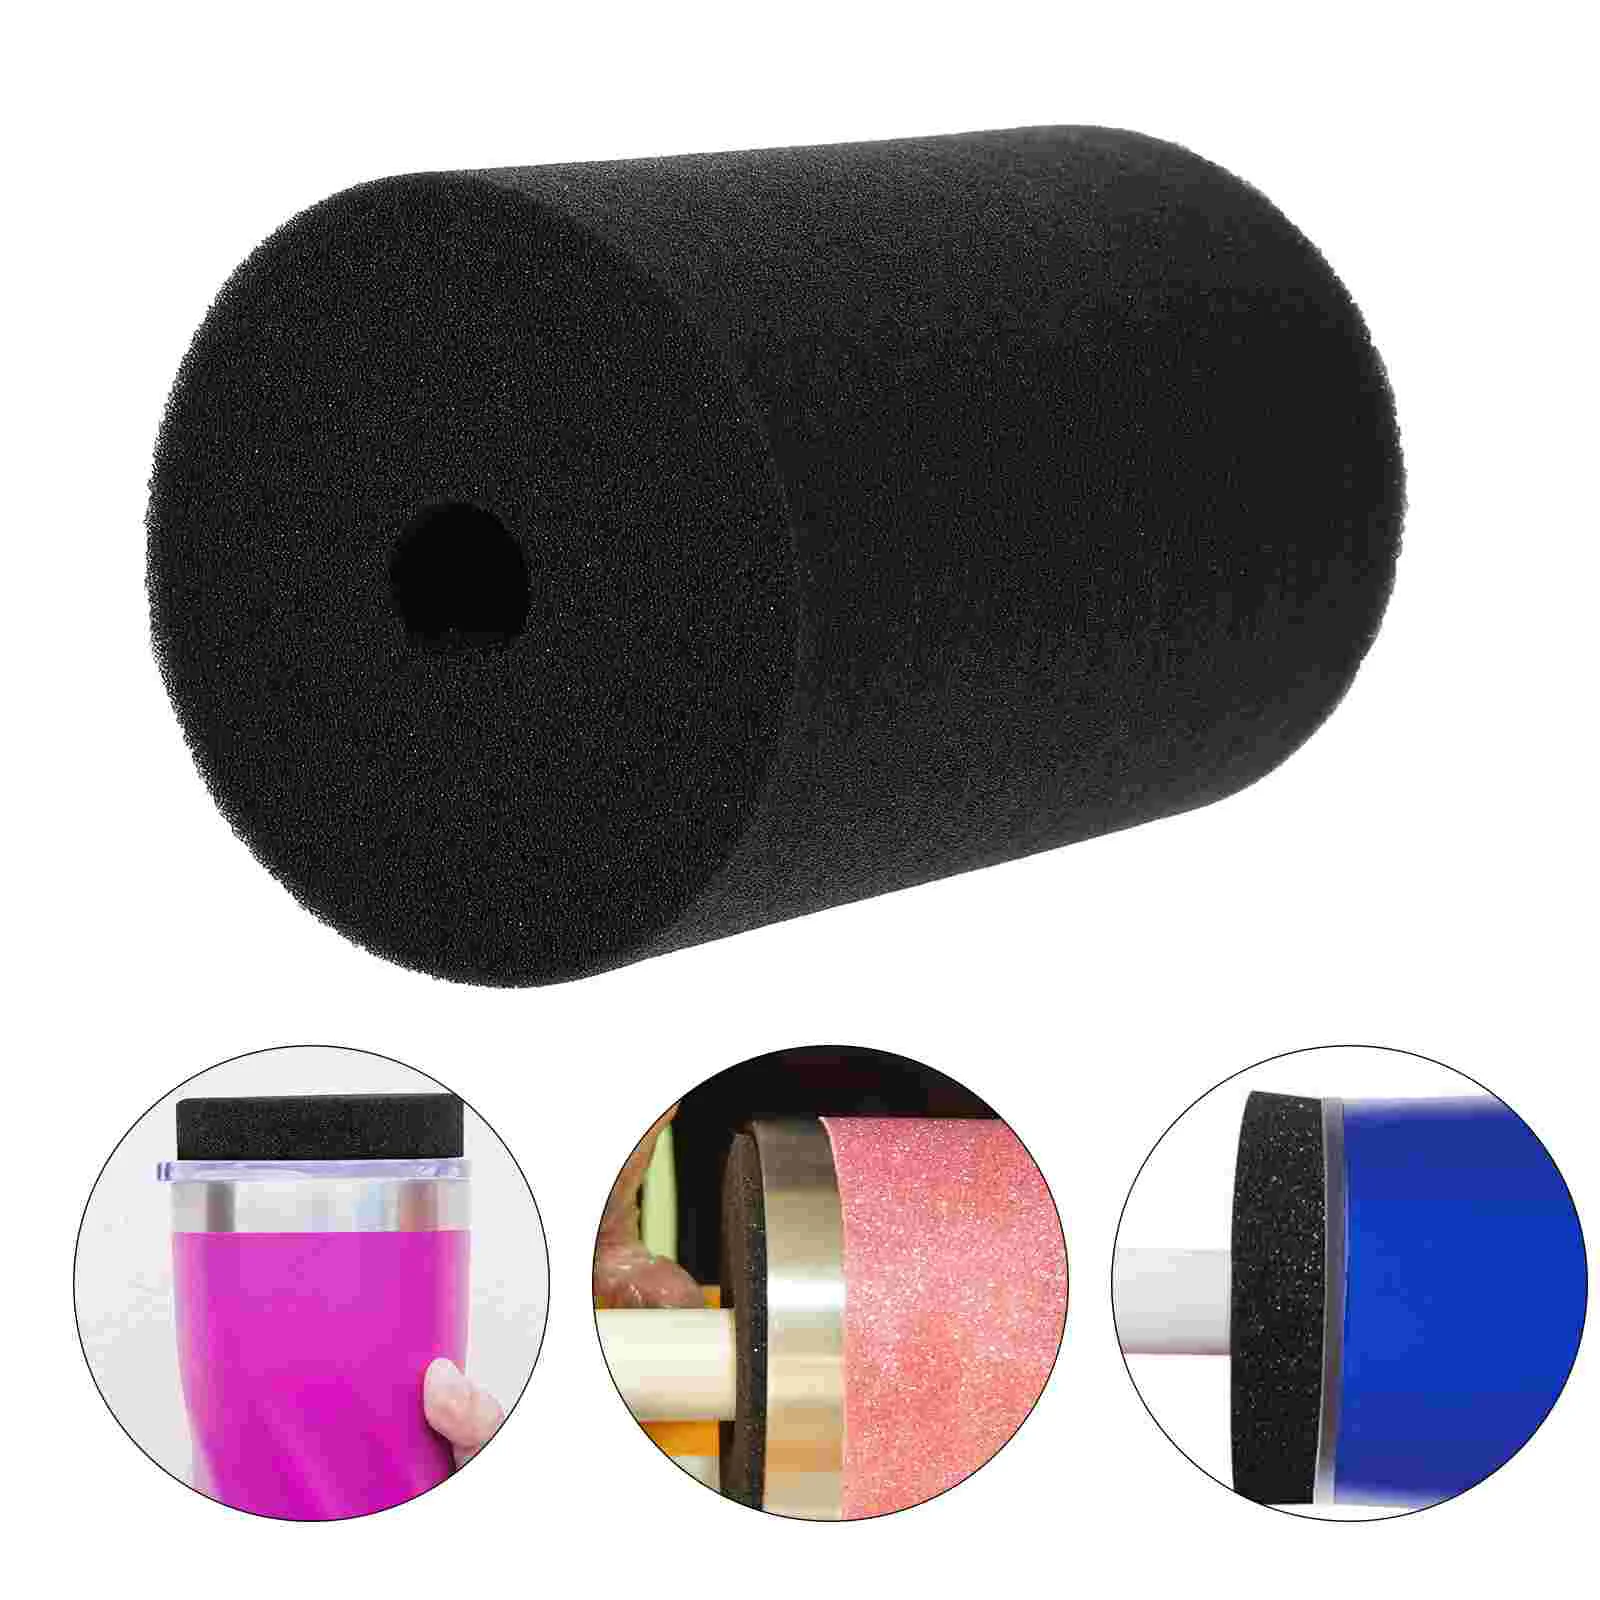 

4 Pcs Cylindrical Sponge Cup Turner Accessories DIY Crafting Cups Supplies Bulk Water Bottles Glass Polyurethane Water Bottles